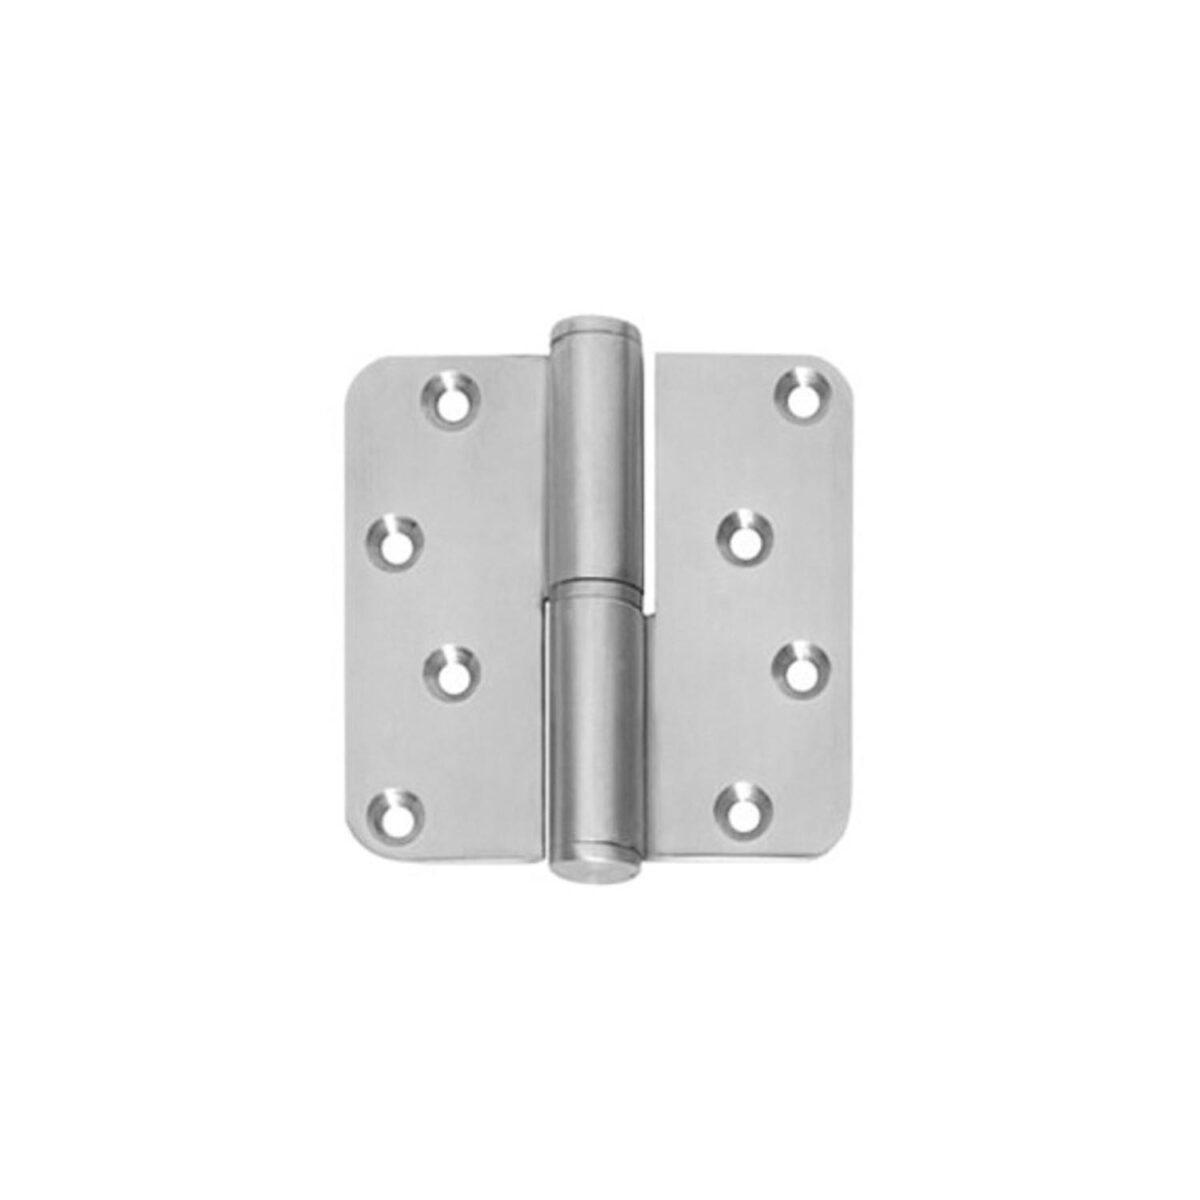 Ball pin hinge DIN left 89 x 89 mm with round corner brushed stainless steel incl. screws